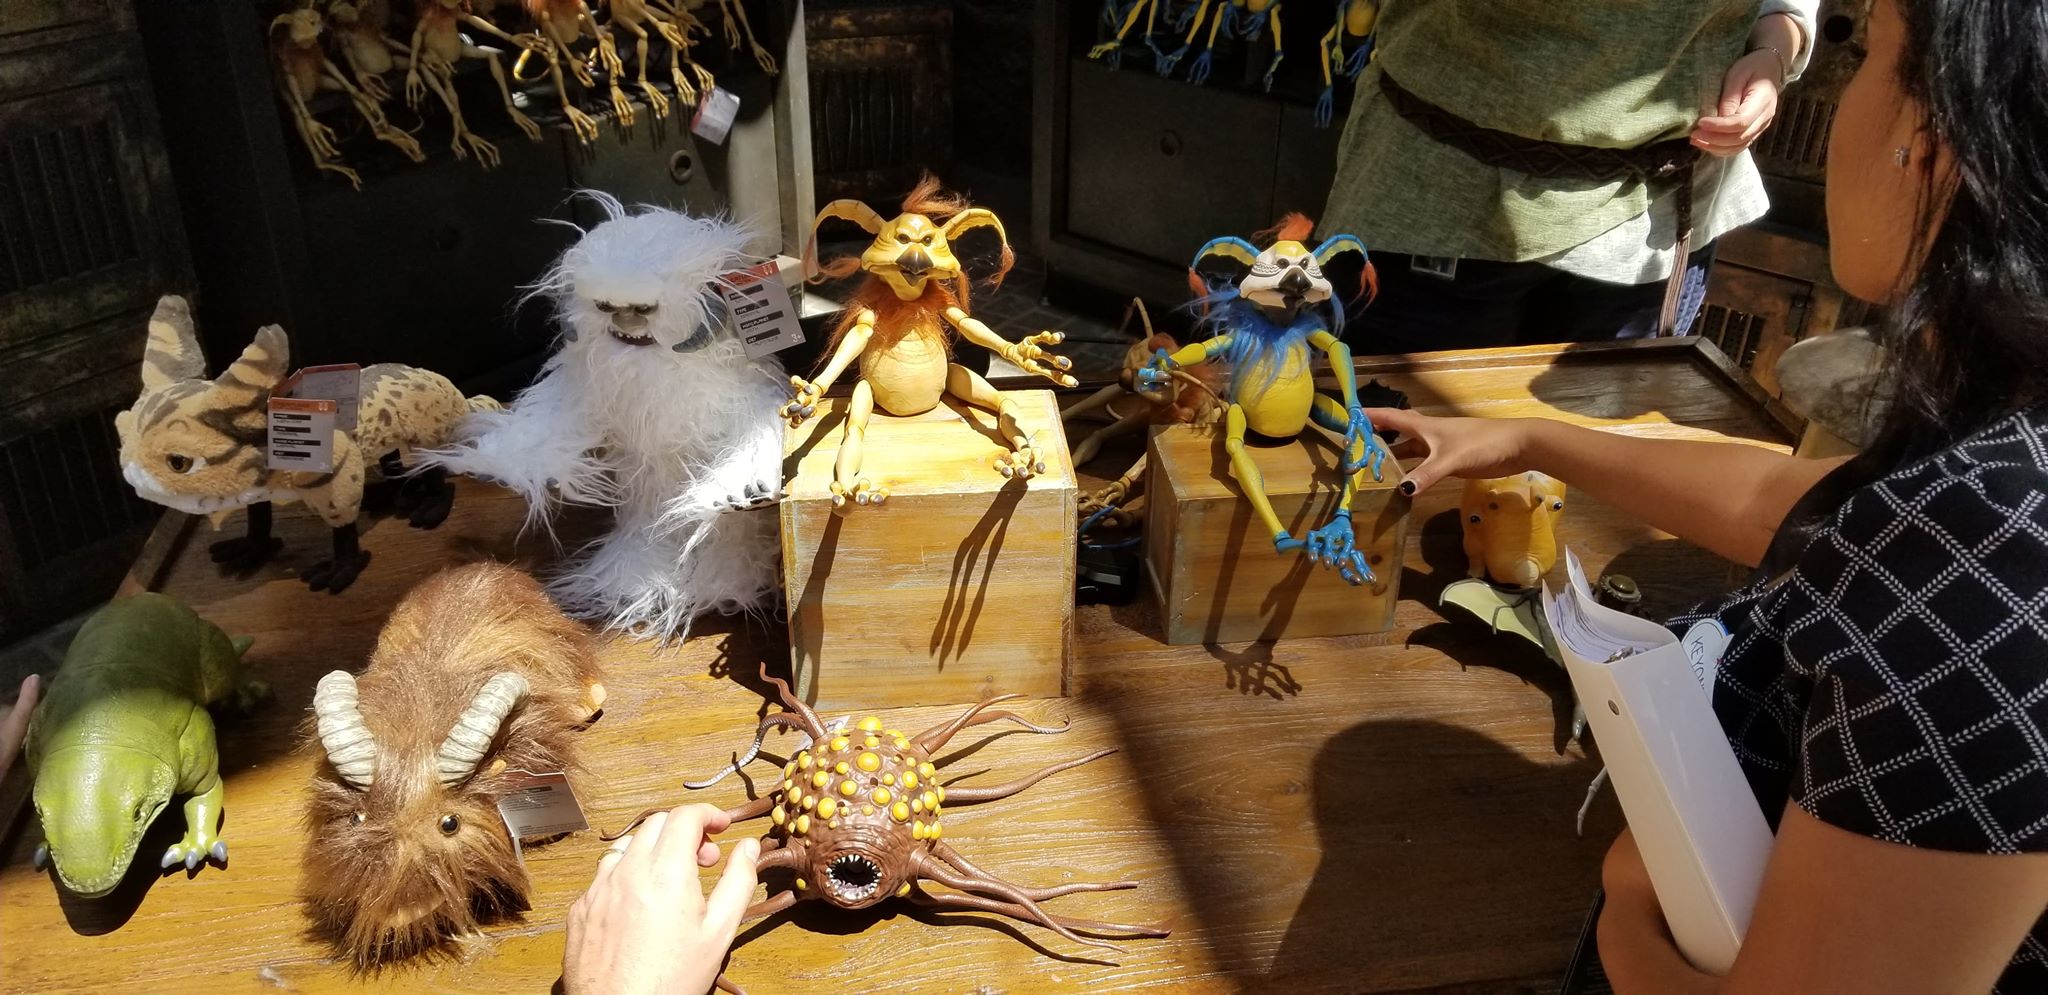 Adopt Star Wars Creatures From The Creature Stall At Galaxy’s Edge